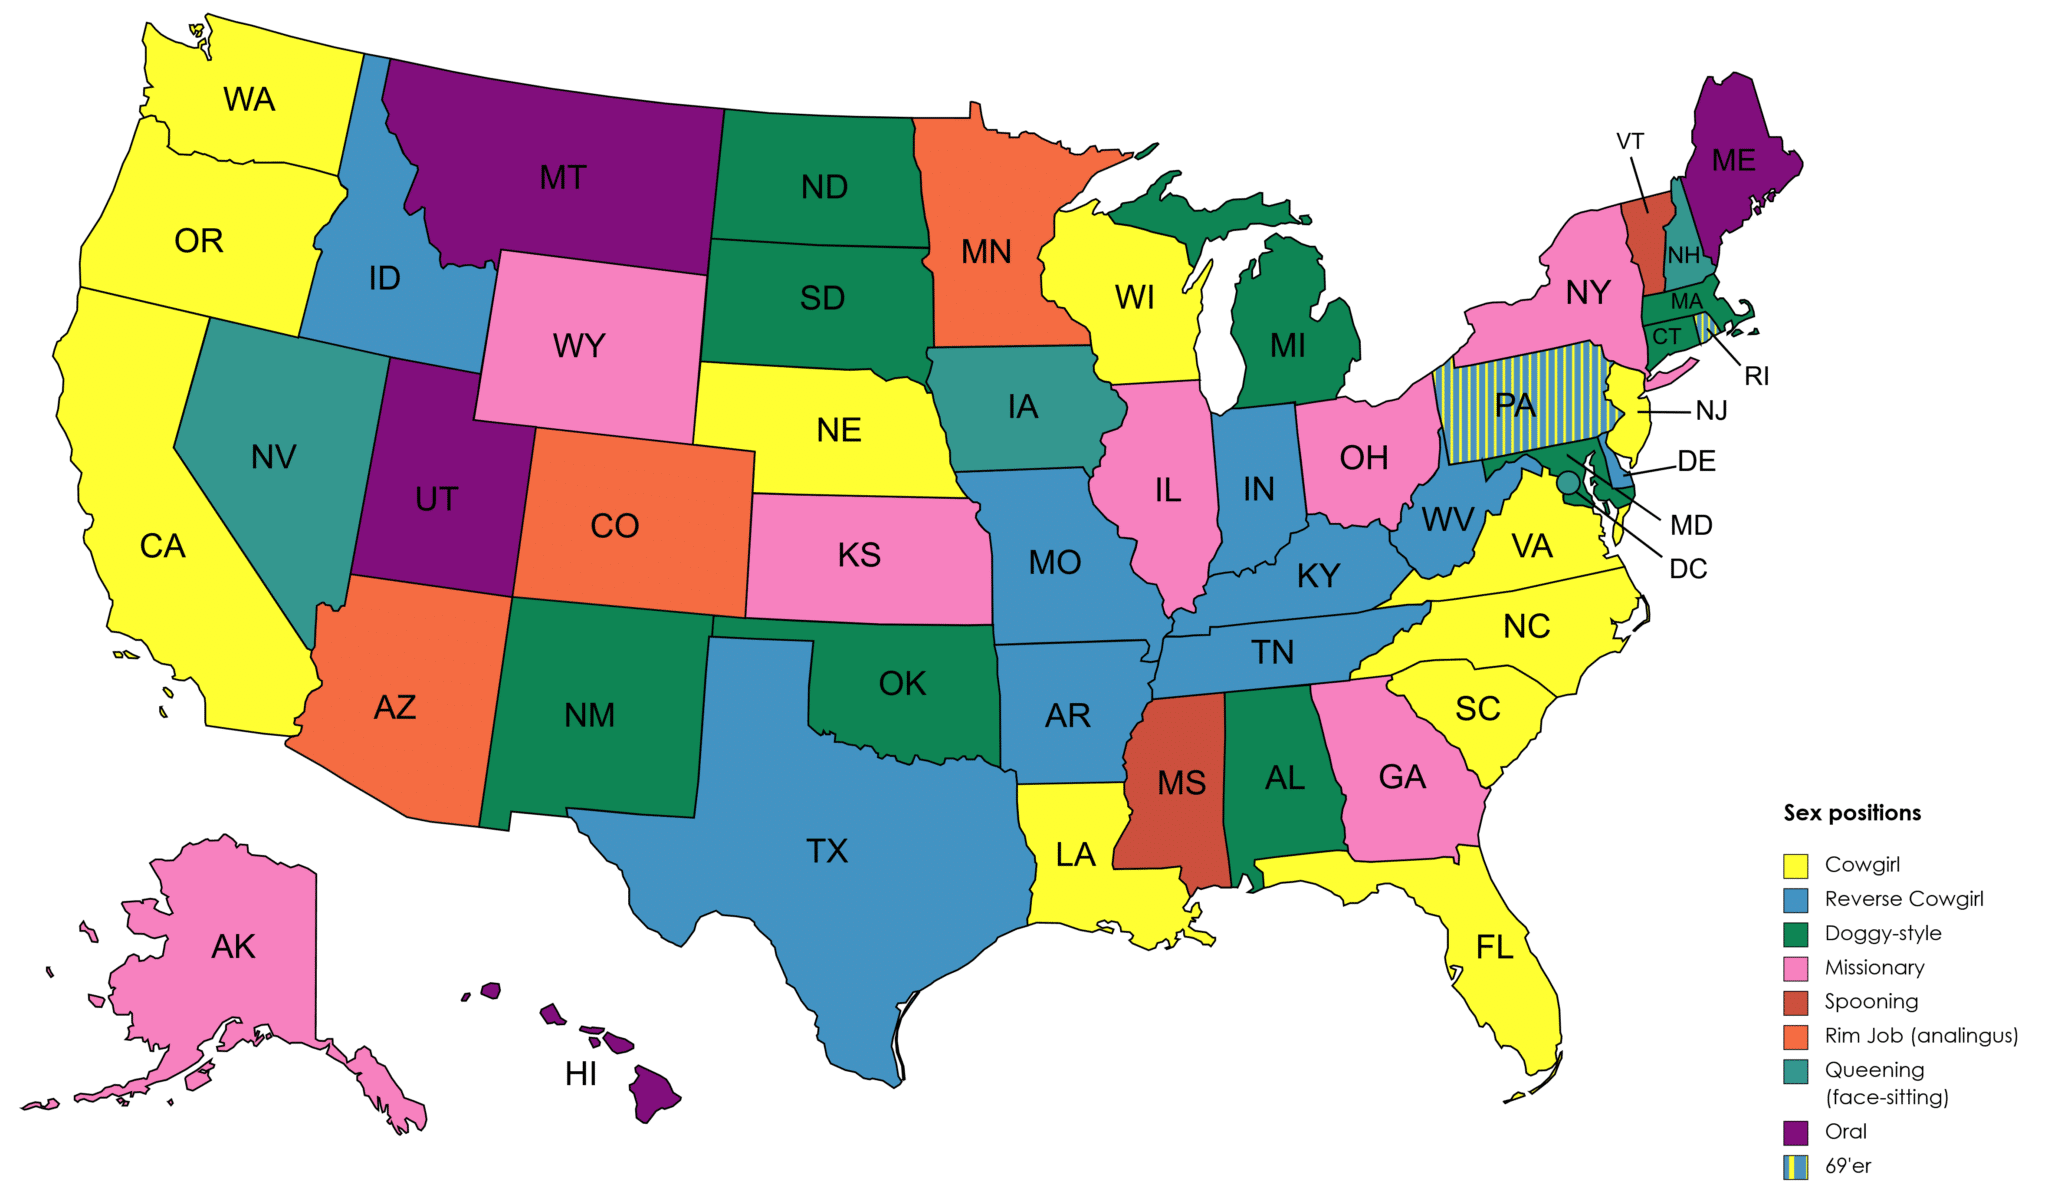 most common sex positions by US state by state